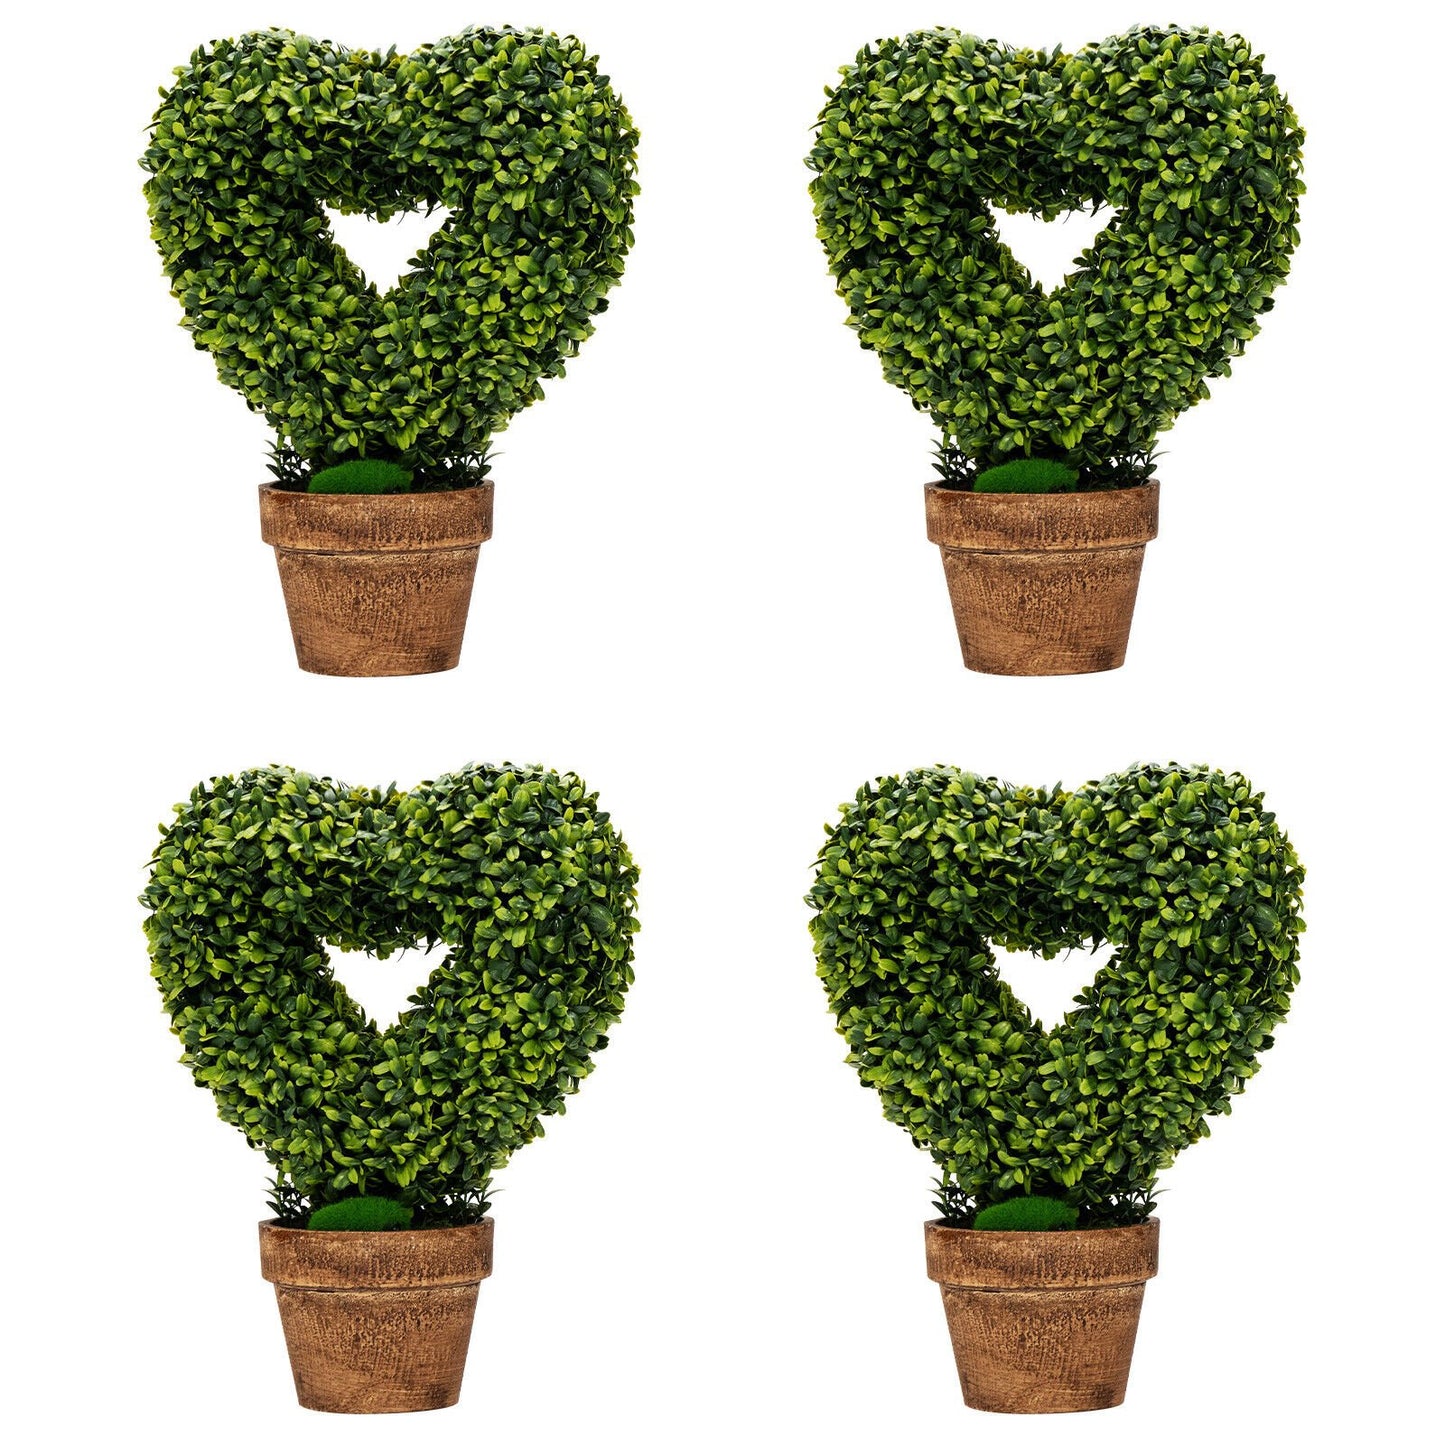 4 Packs 14.5 Inch Mini Artificial Boxwood Topiary Trees with Heart Shape, Green